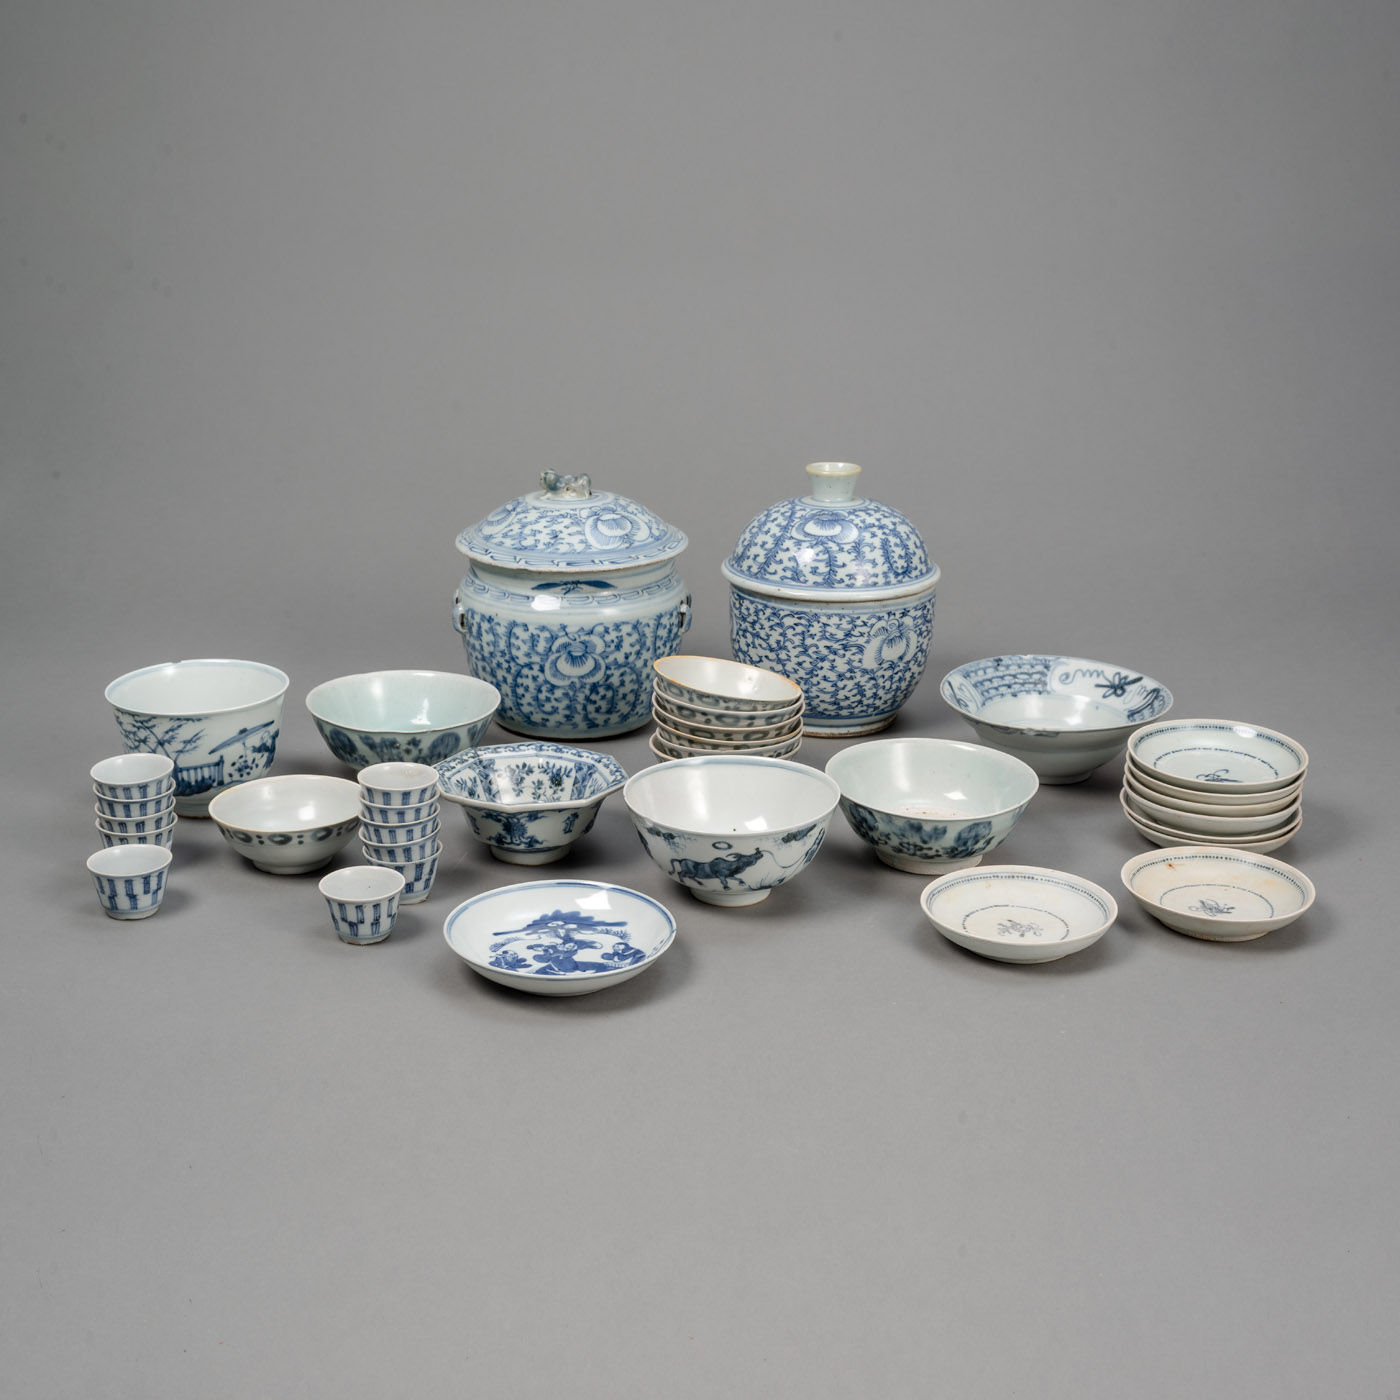 <b>A GROUP OF 35 PIECES OF BLUE AND WHITE PORCELAIN, I.A. TEK SING CUPS AND SAUCERS, LIDDED BOXES</b>